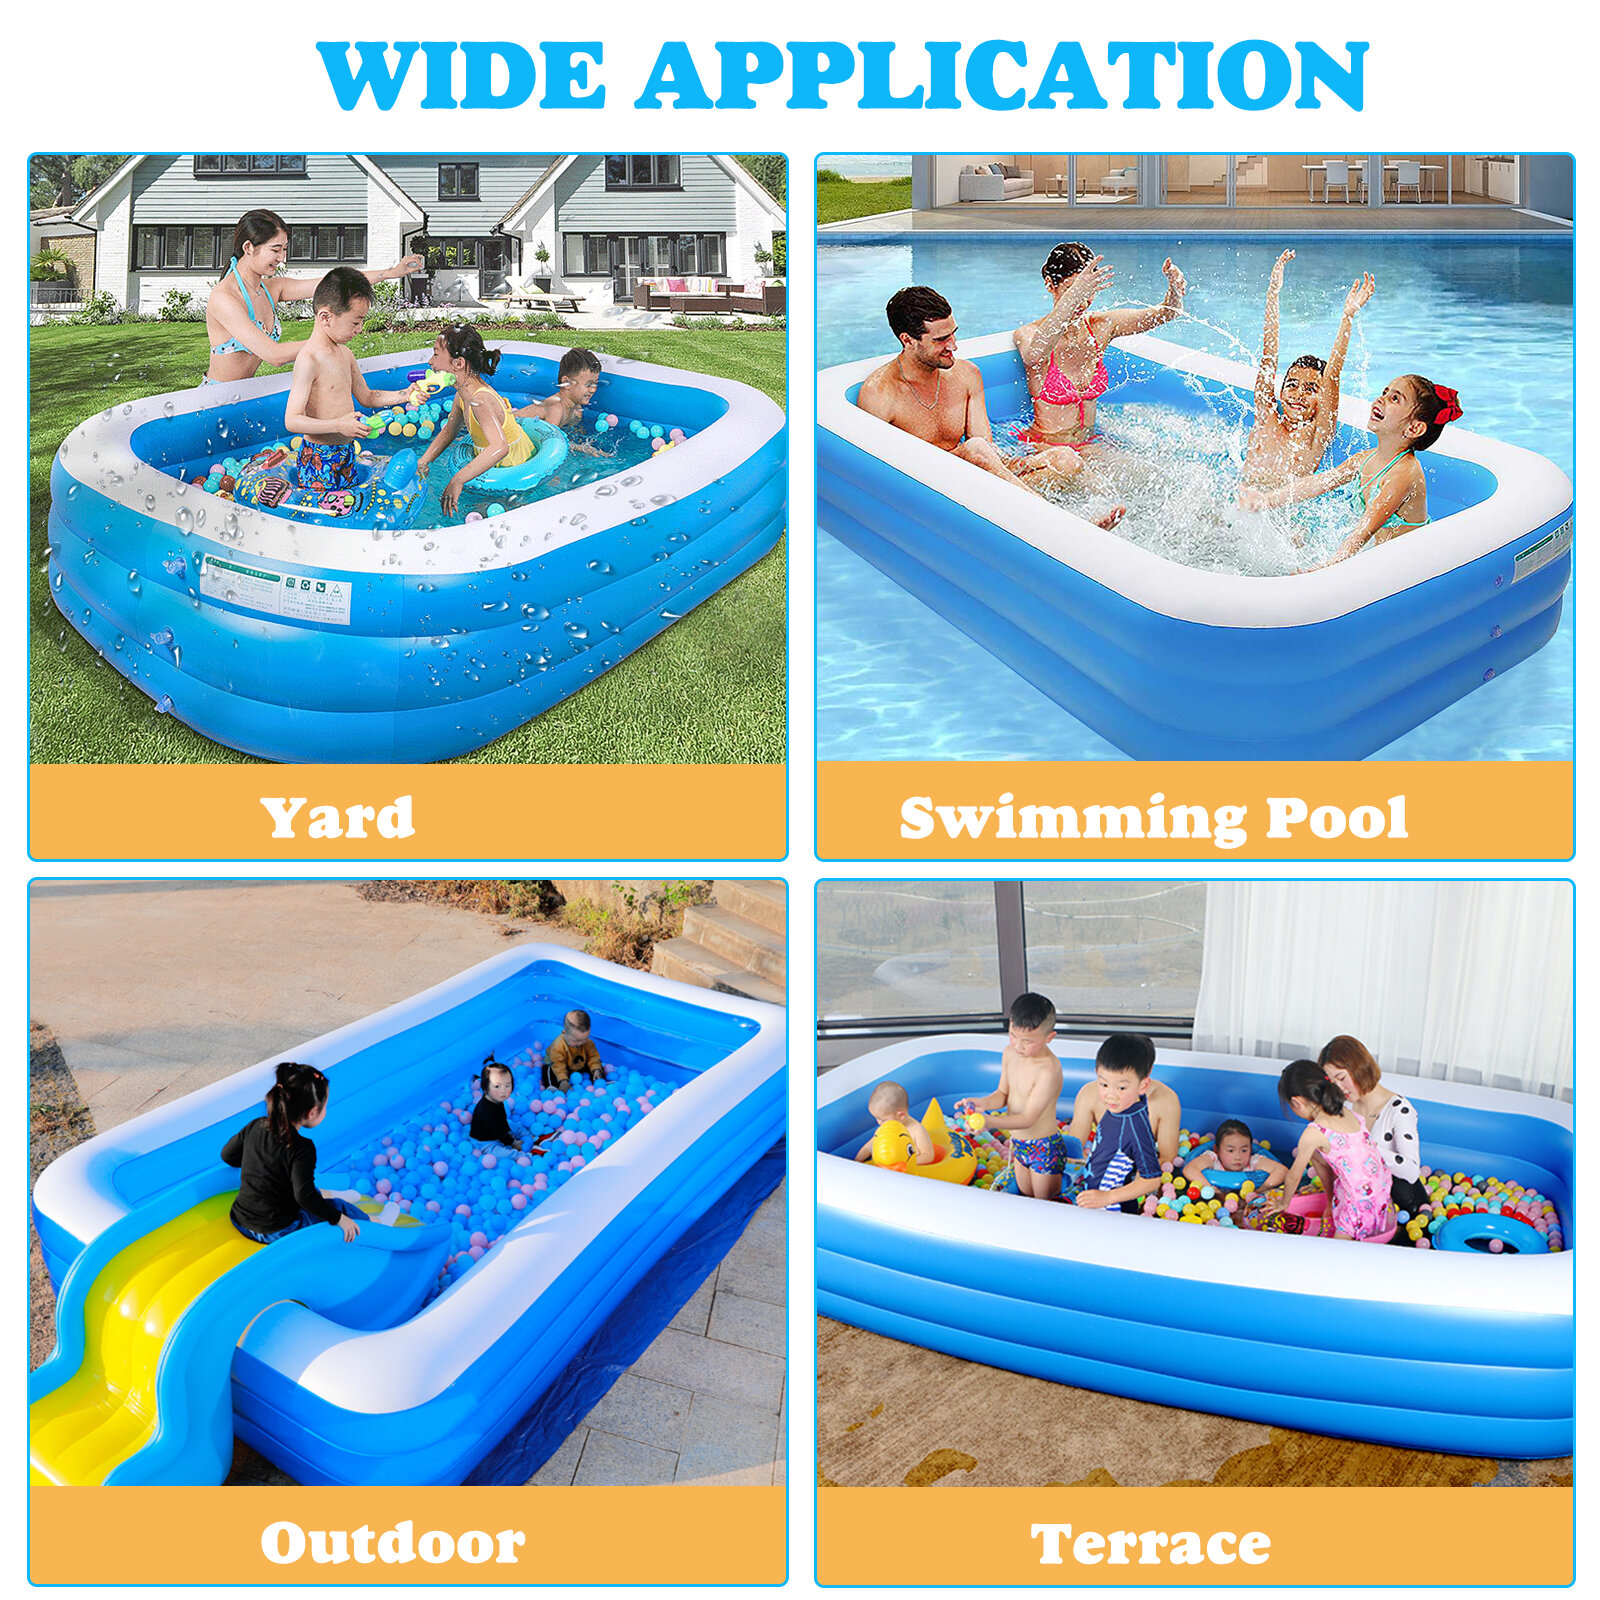 LARGE PADDLING GARDEN POOL KIDS FUN FAMILY SWIMMING OUTDOOR INFLATABLE 45 x 10" 